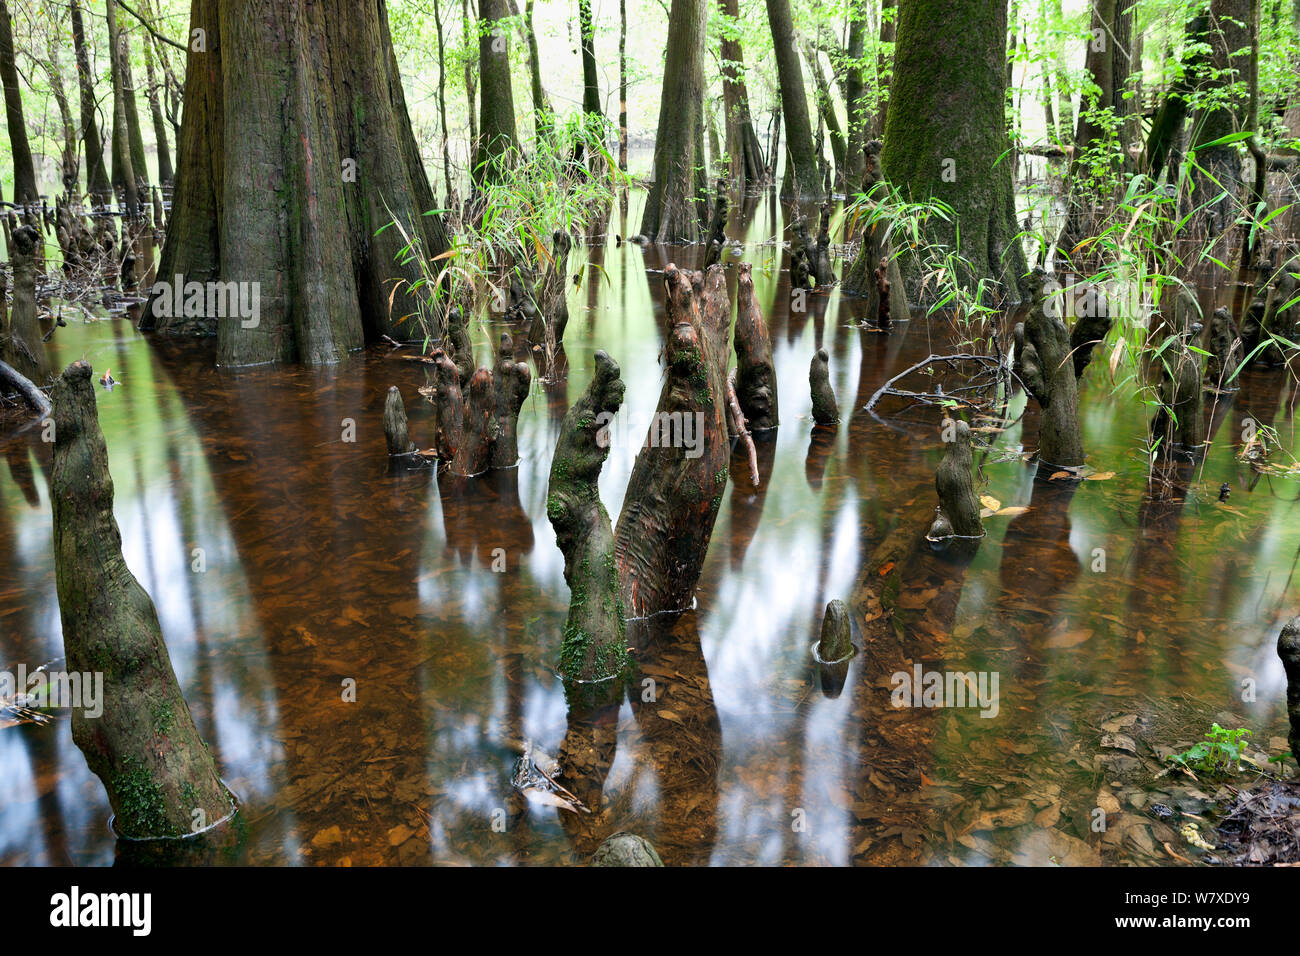 The edge of Weston Lake with bald cypress (Taxodium distichum) trees and  knees in Congaree National Park, South Carolina, USA. Stock Photo